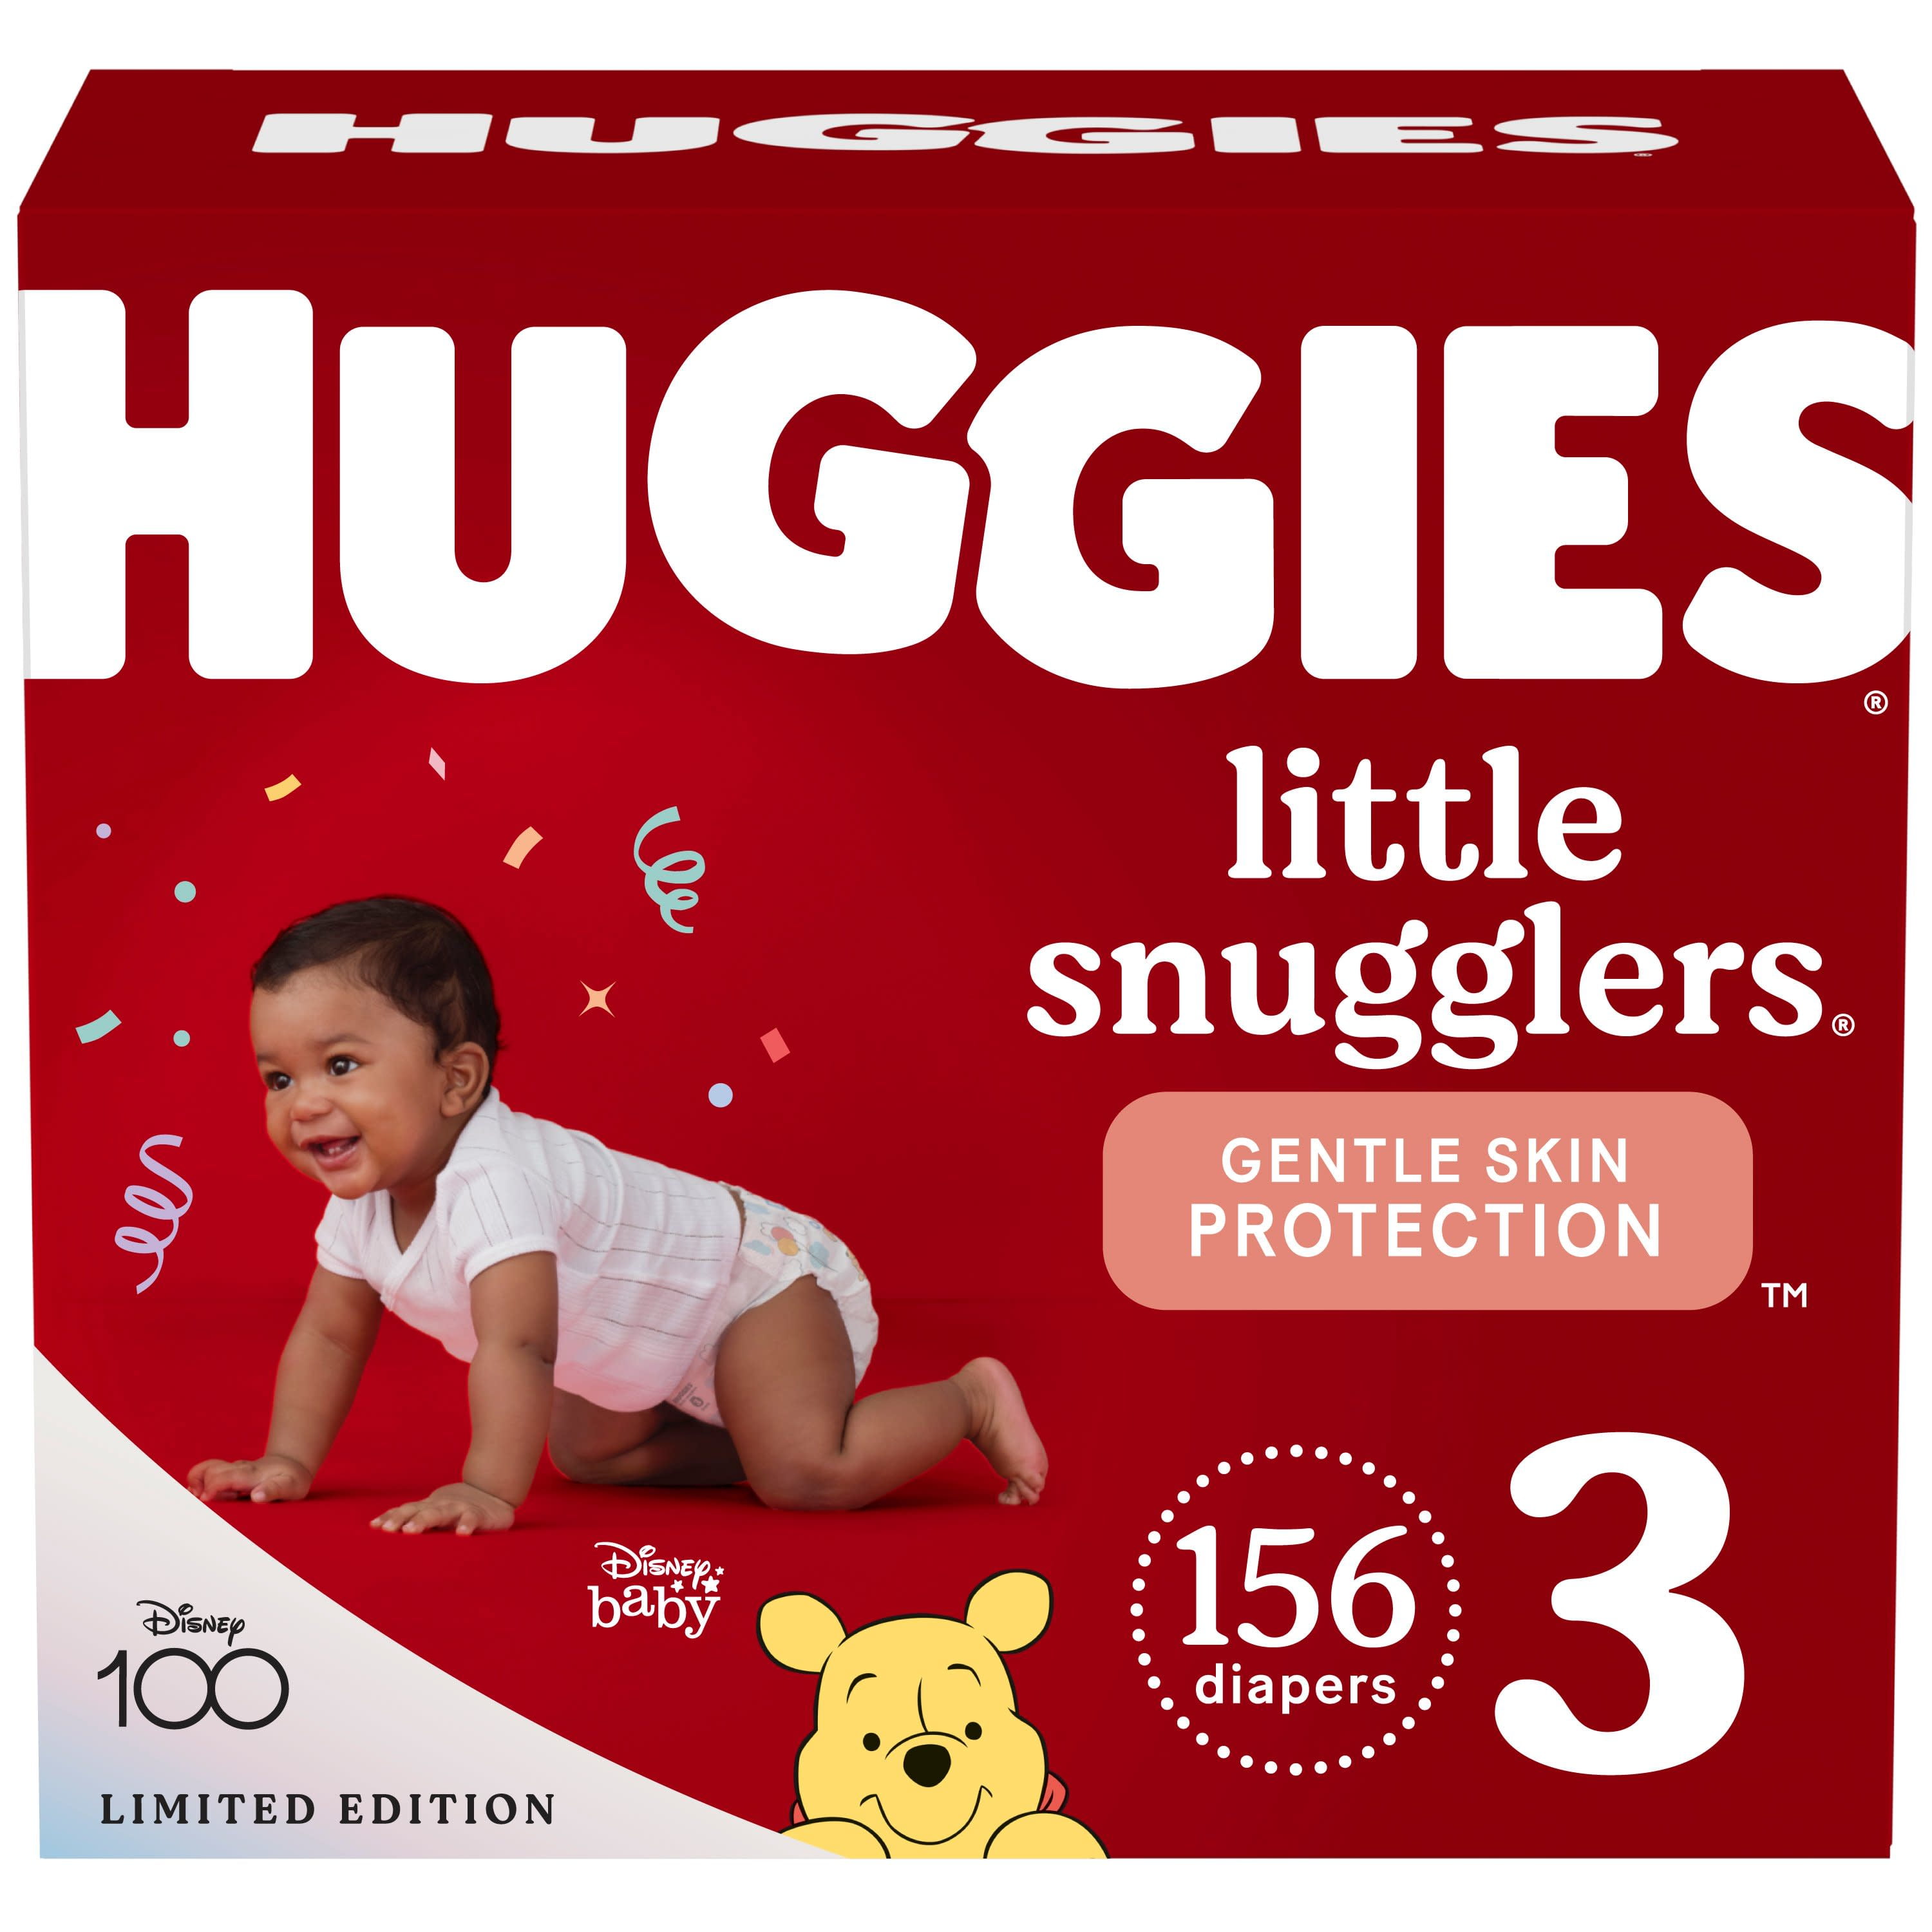 Hypoallergenic Baby Diapers Size 1 (8-14 lbs), Huggies Special Delivery,  Fragrance Free, Safe for Sensitive Skin, 72 Ct Size 1 NEW